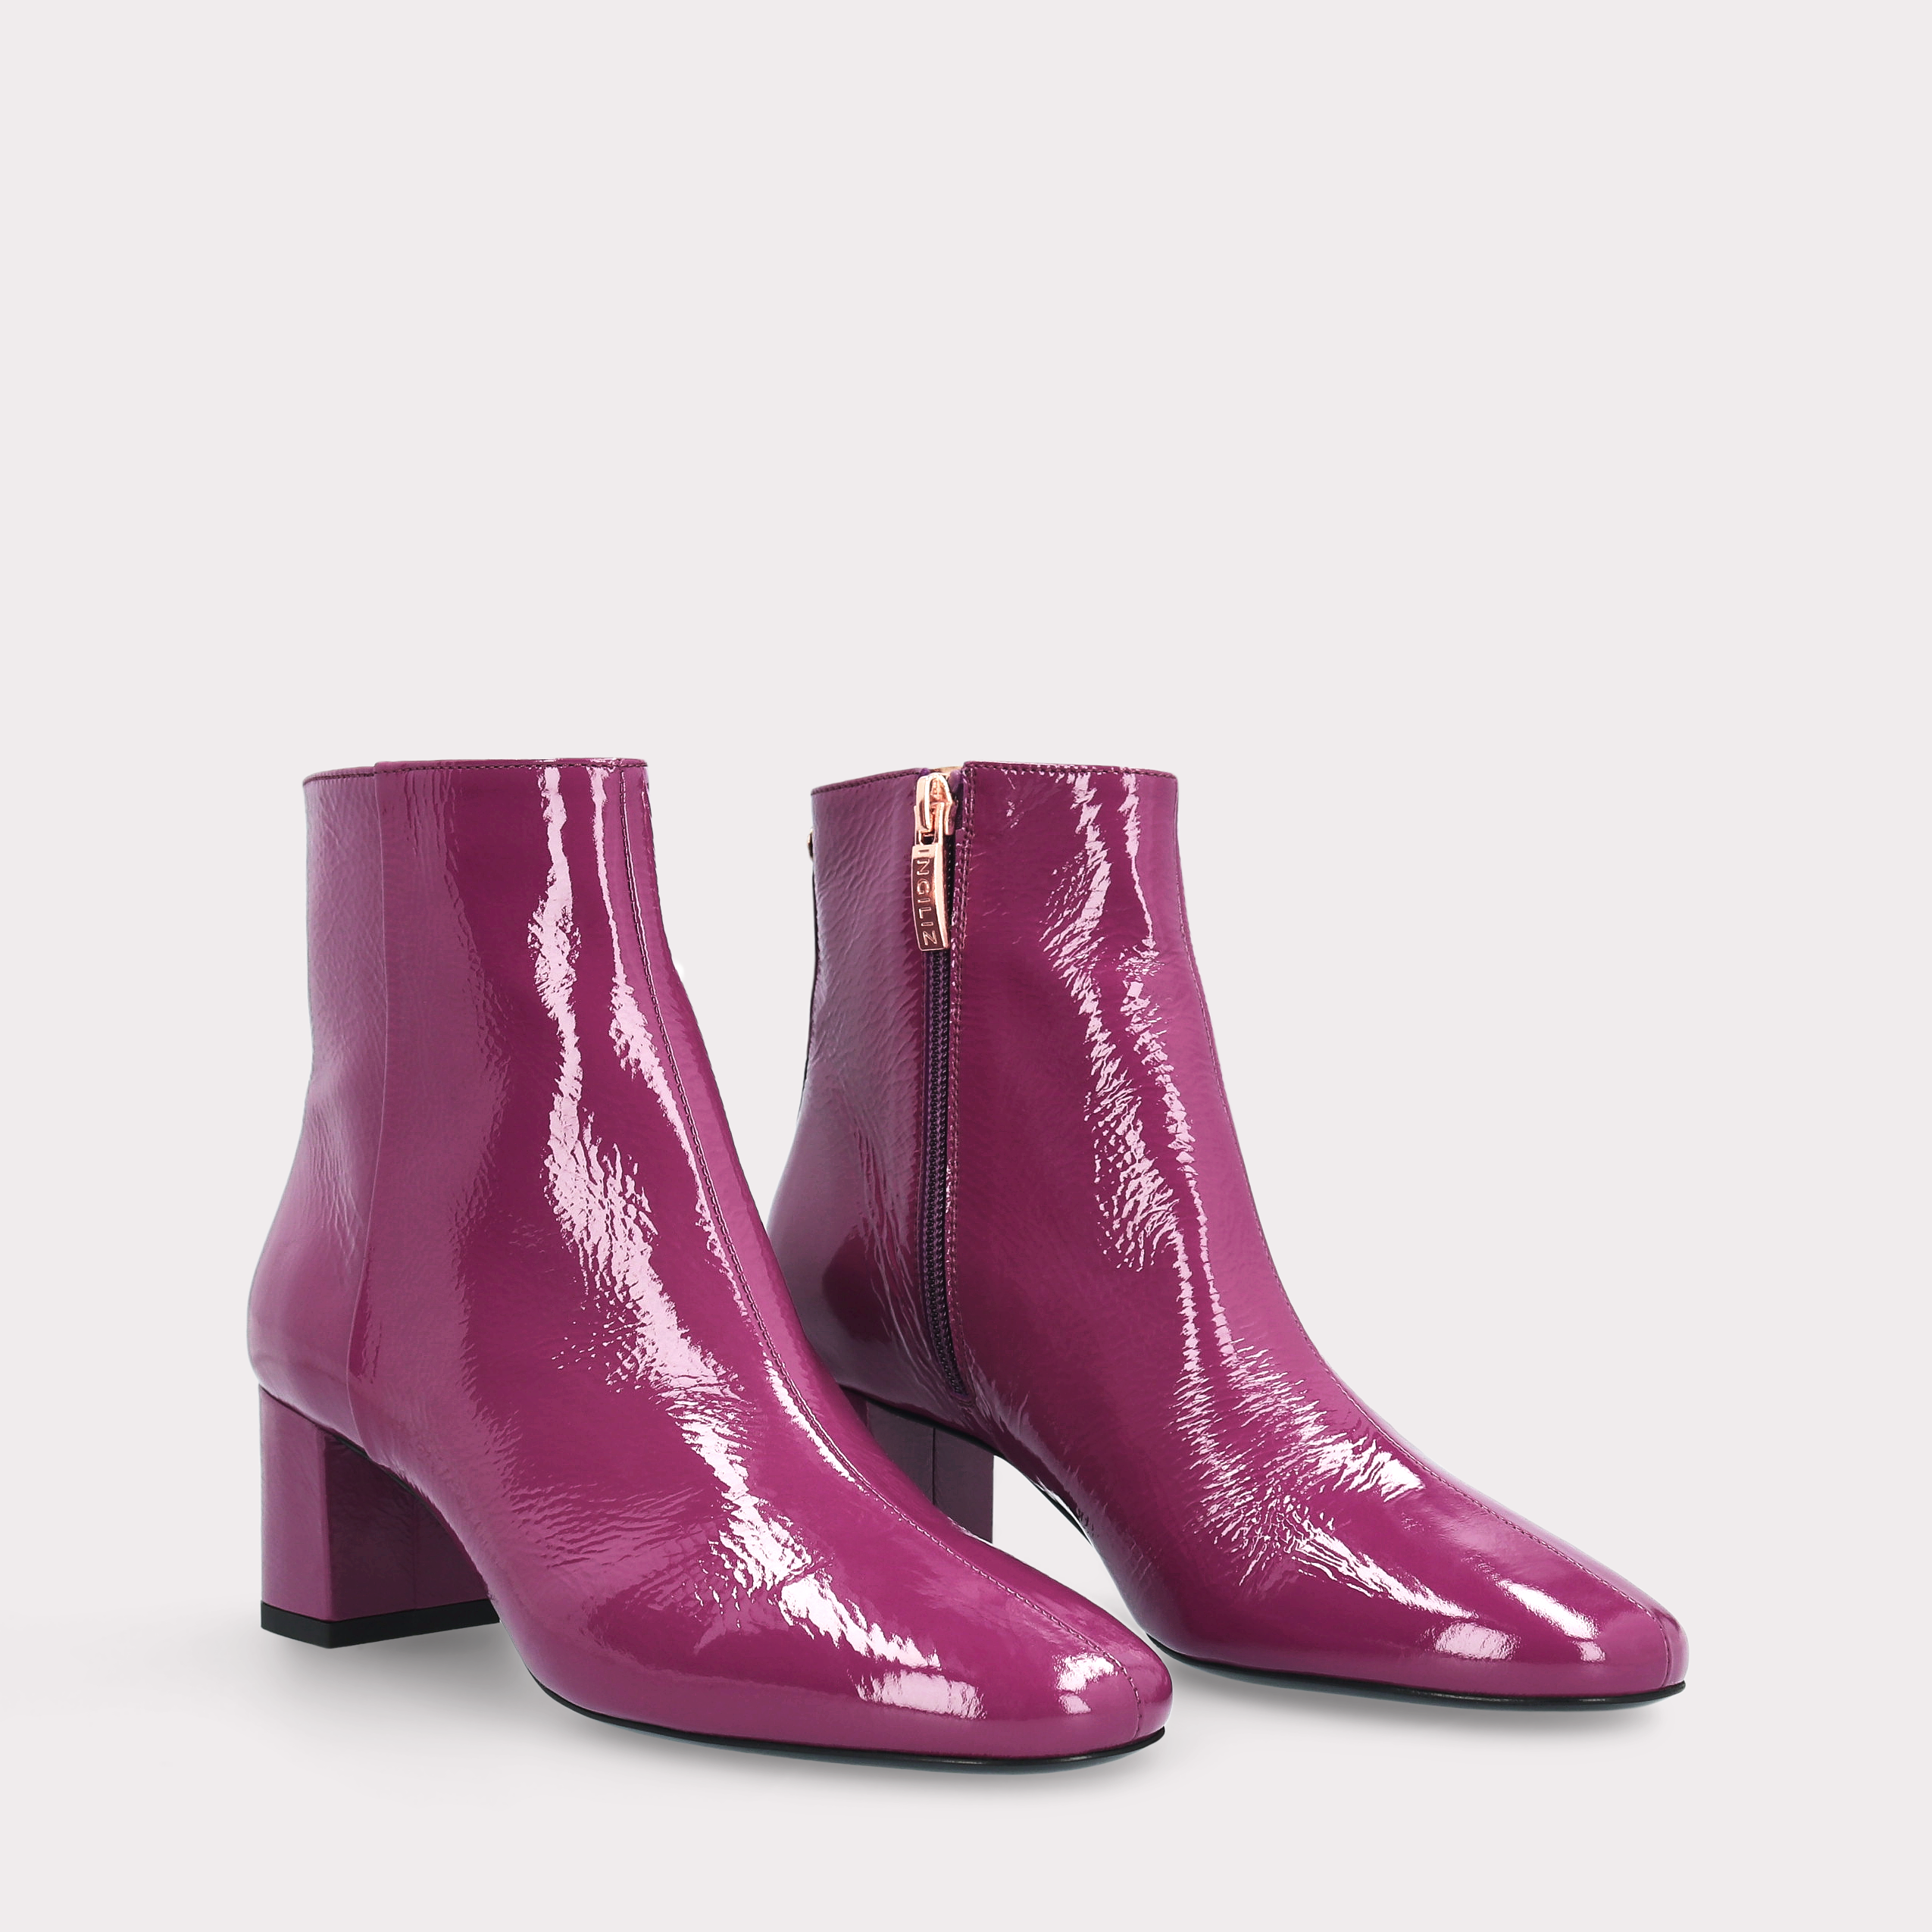 DEBBY PURPLE CRUSHED PATENT LEATHER ANKLE BOOTS